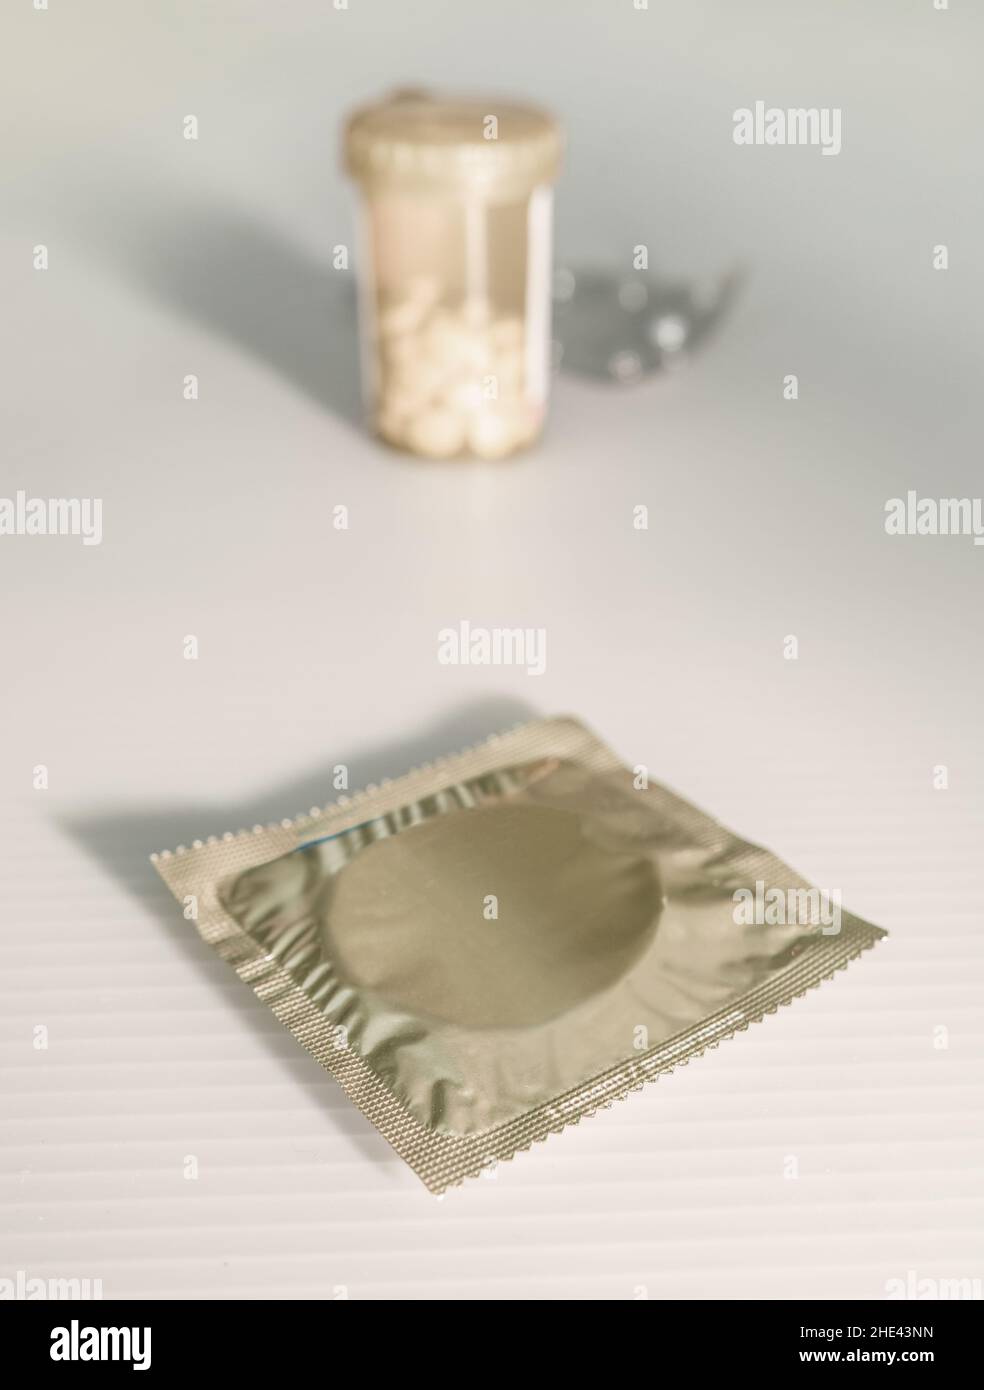 In the foreground, the condom, in the background, a container of meds and pills. Stock Photo